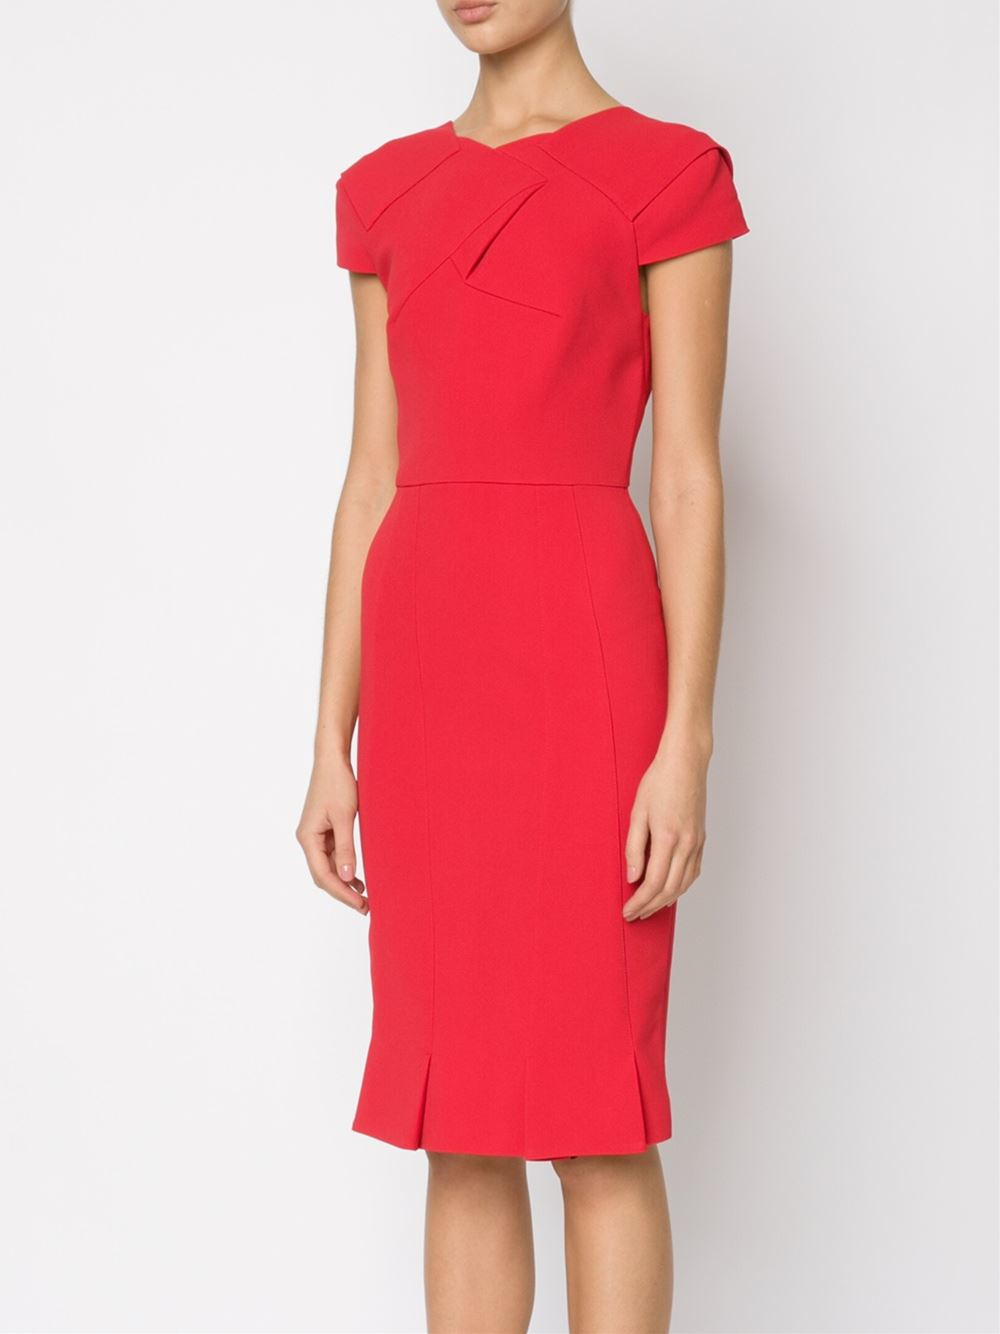 Lyst - Roland Mouret 'linte' Dress in Red